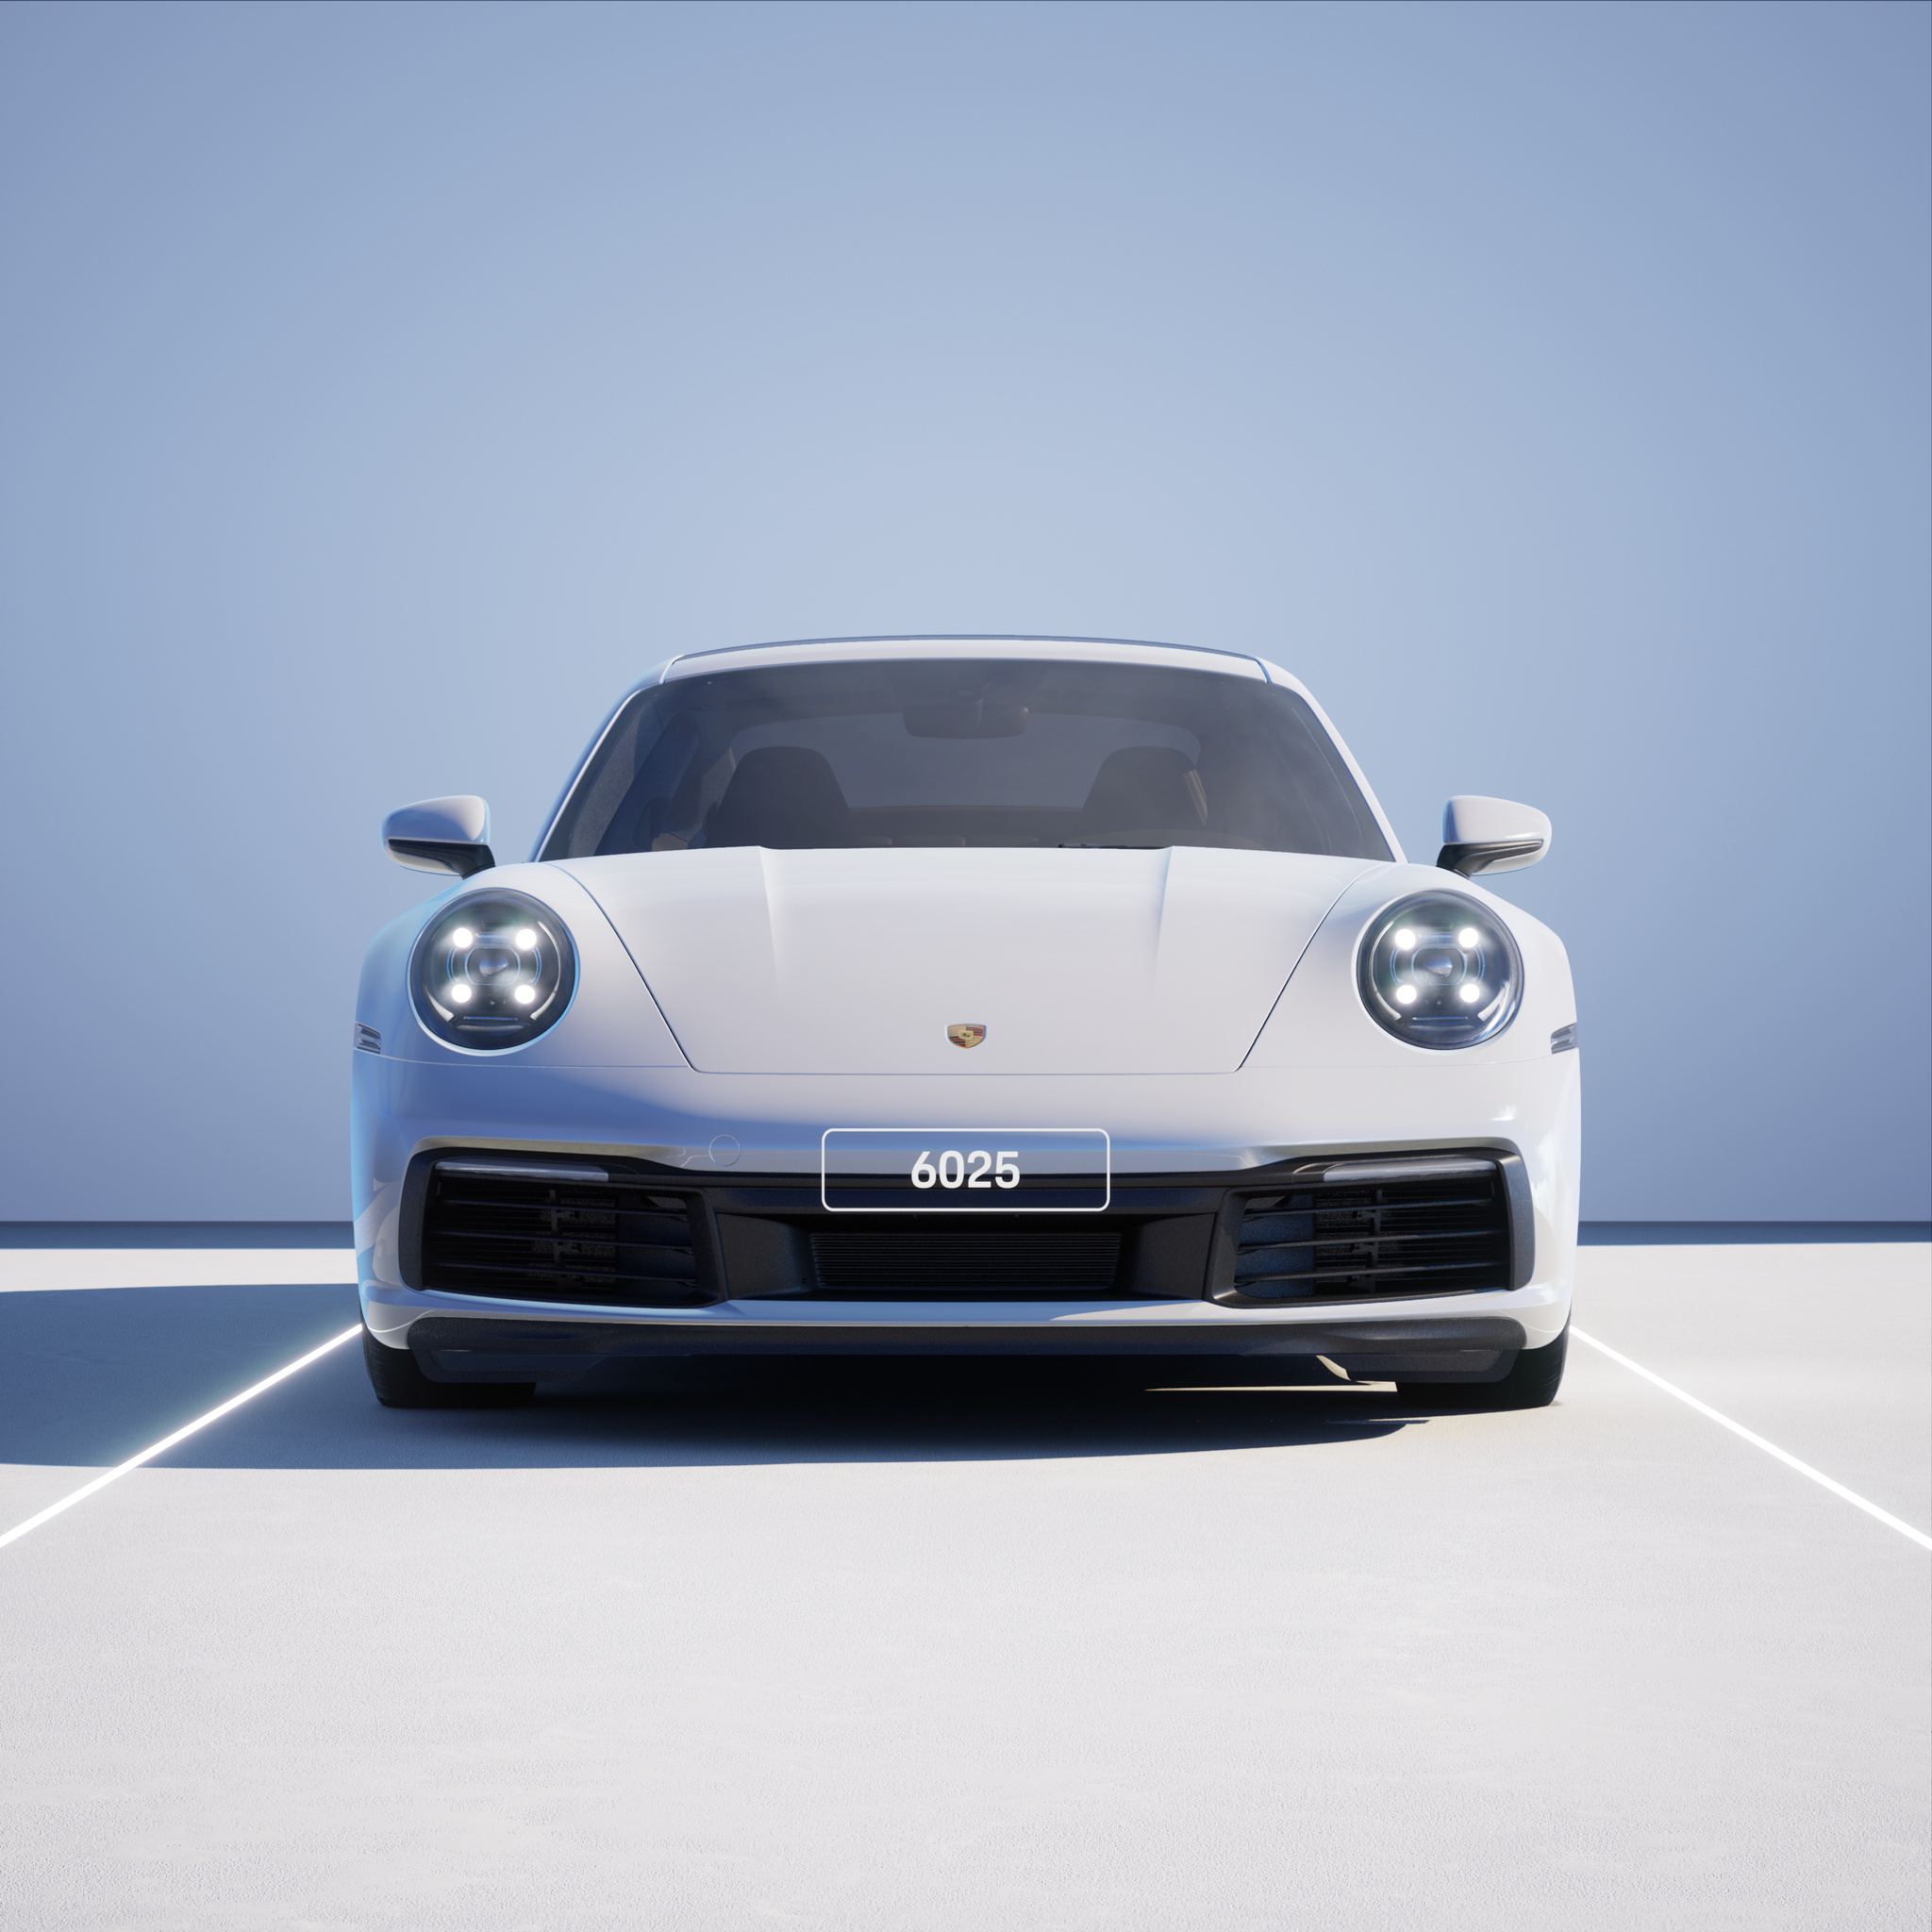 The PORSCHΞ 911 6025 image in phase